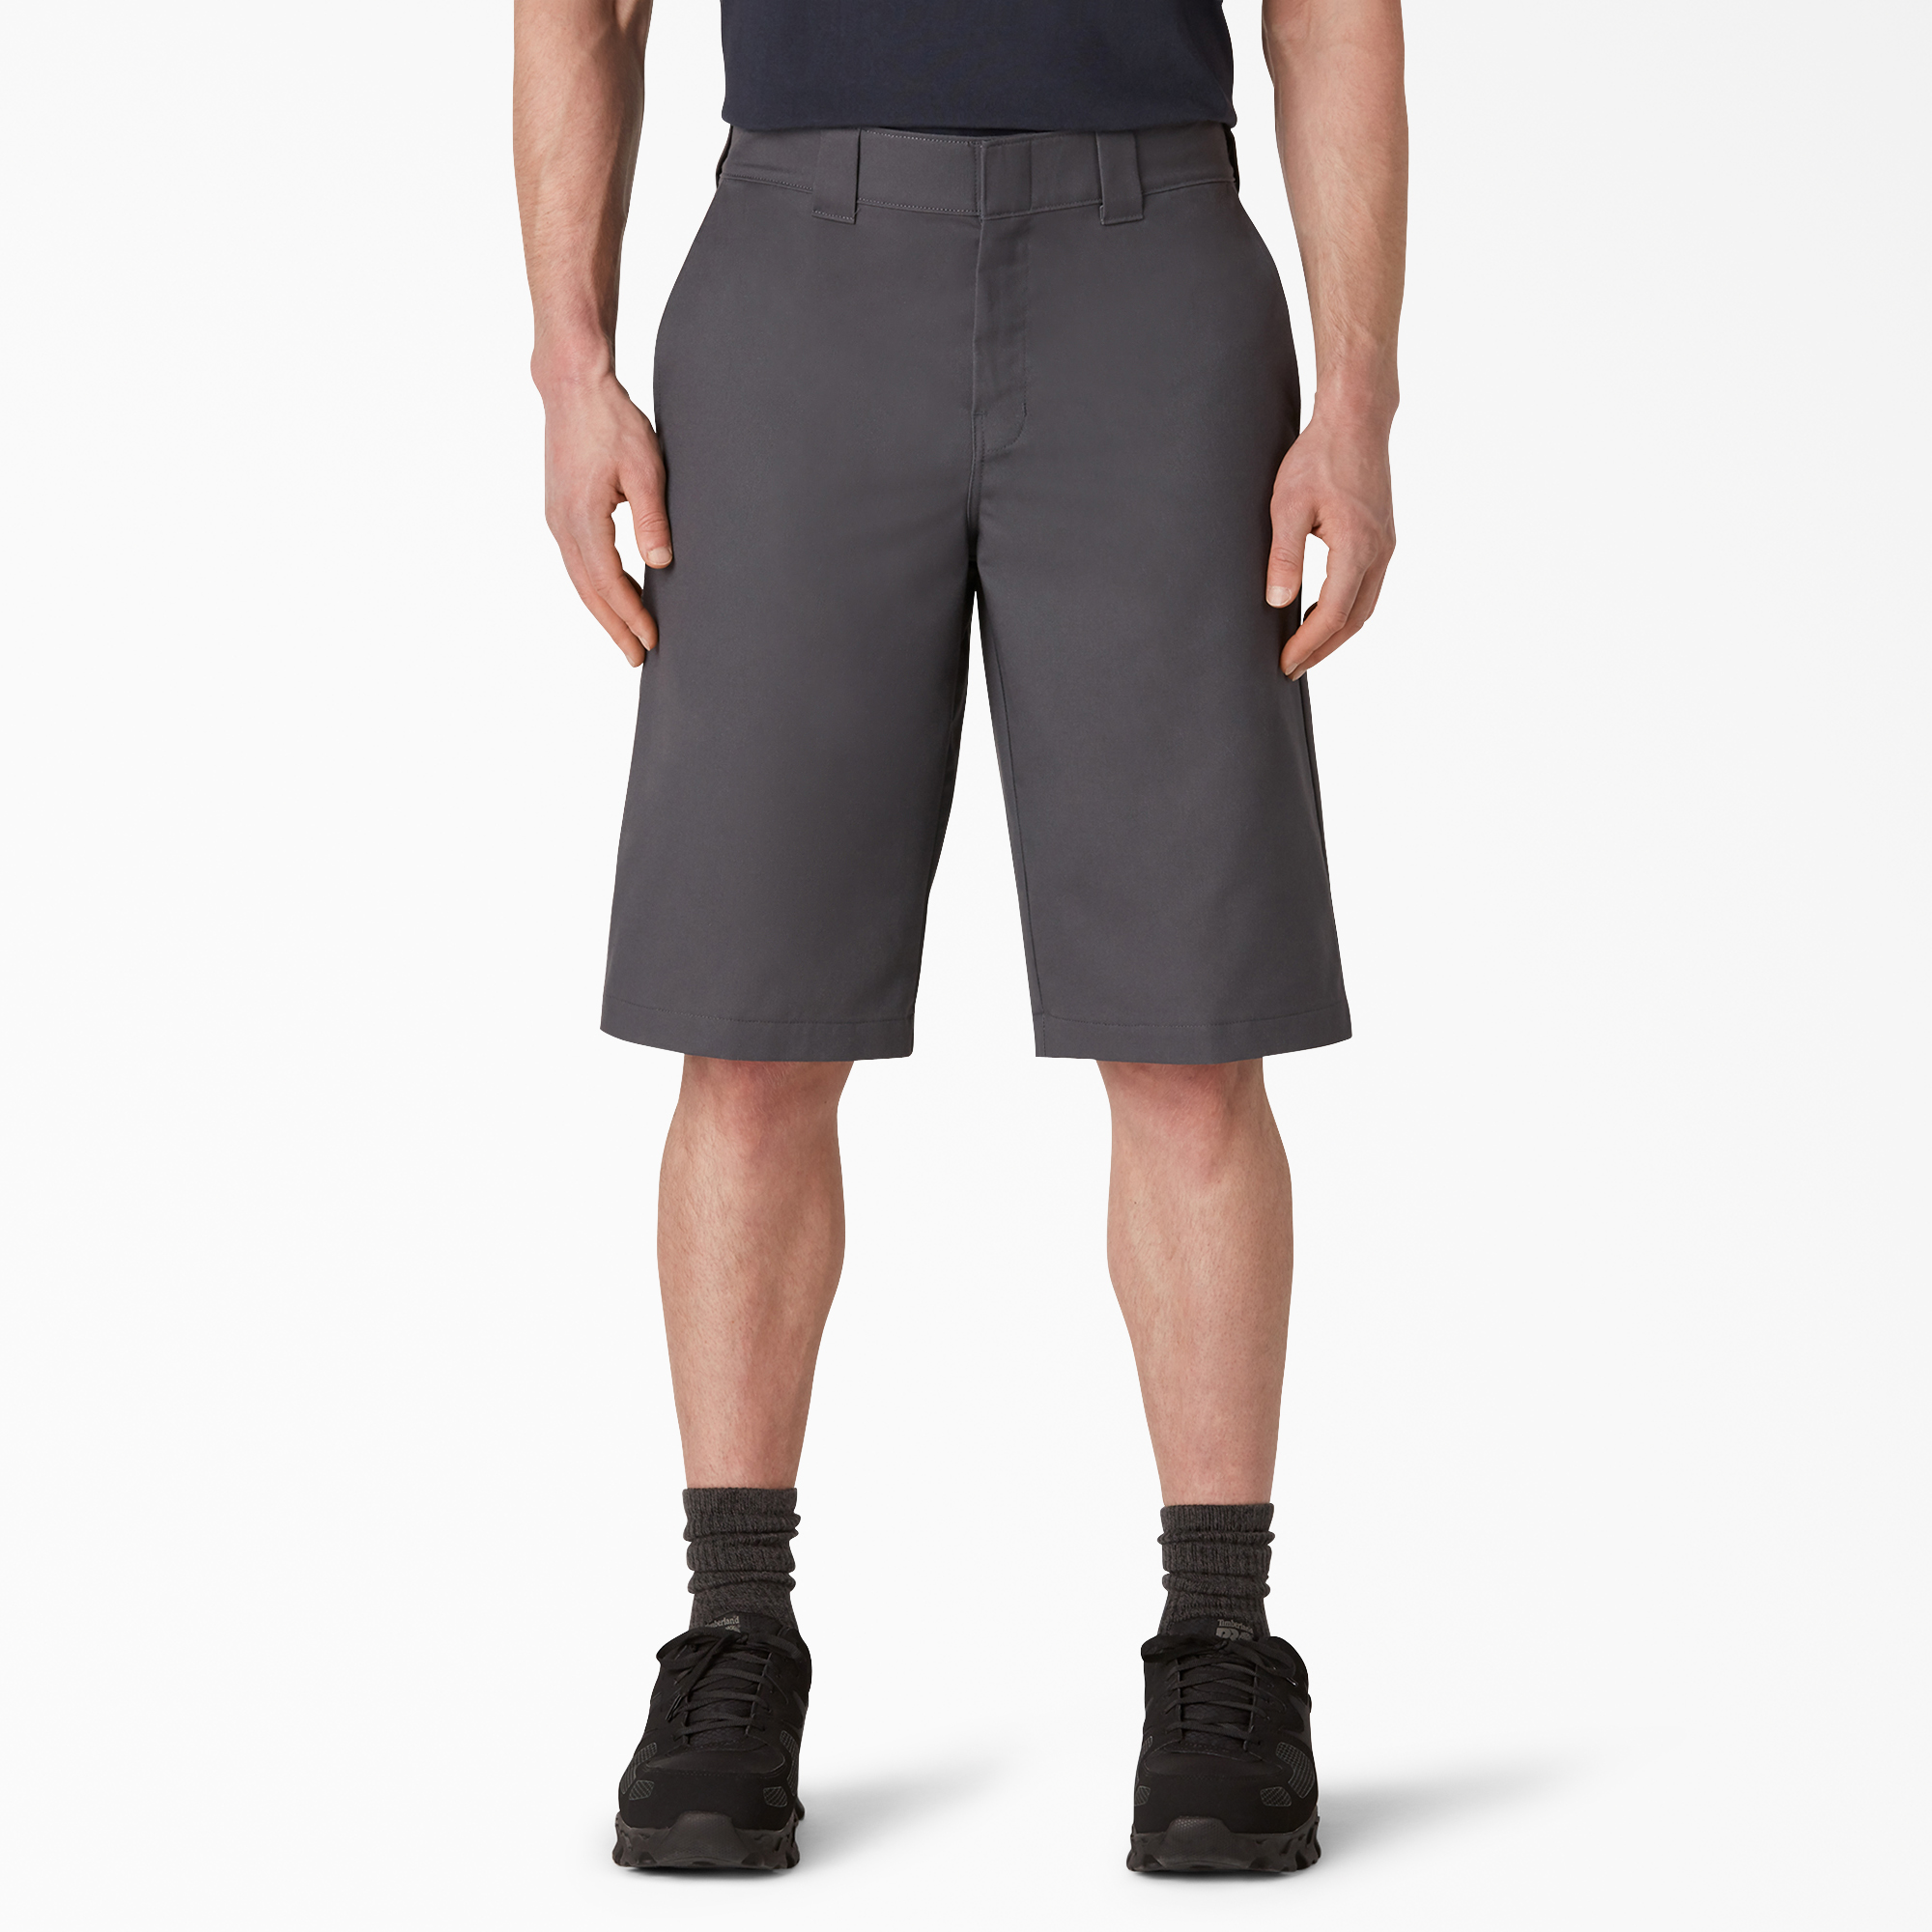 13" Cooling Active Waist Flat Front Shorts - Charcoal Gray (CH)